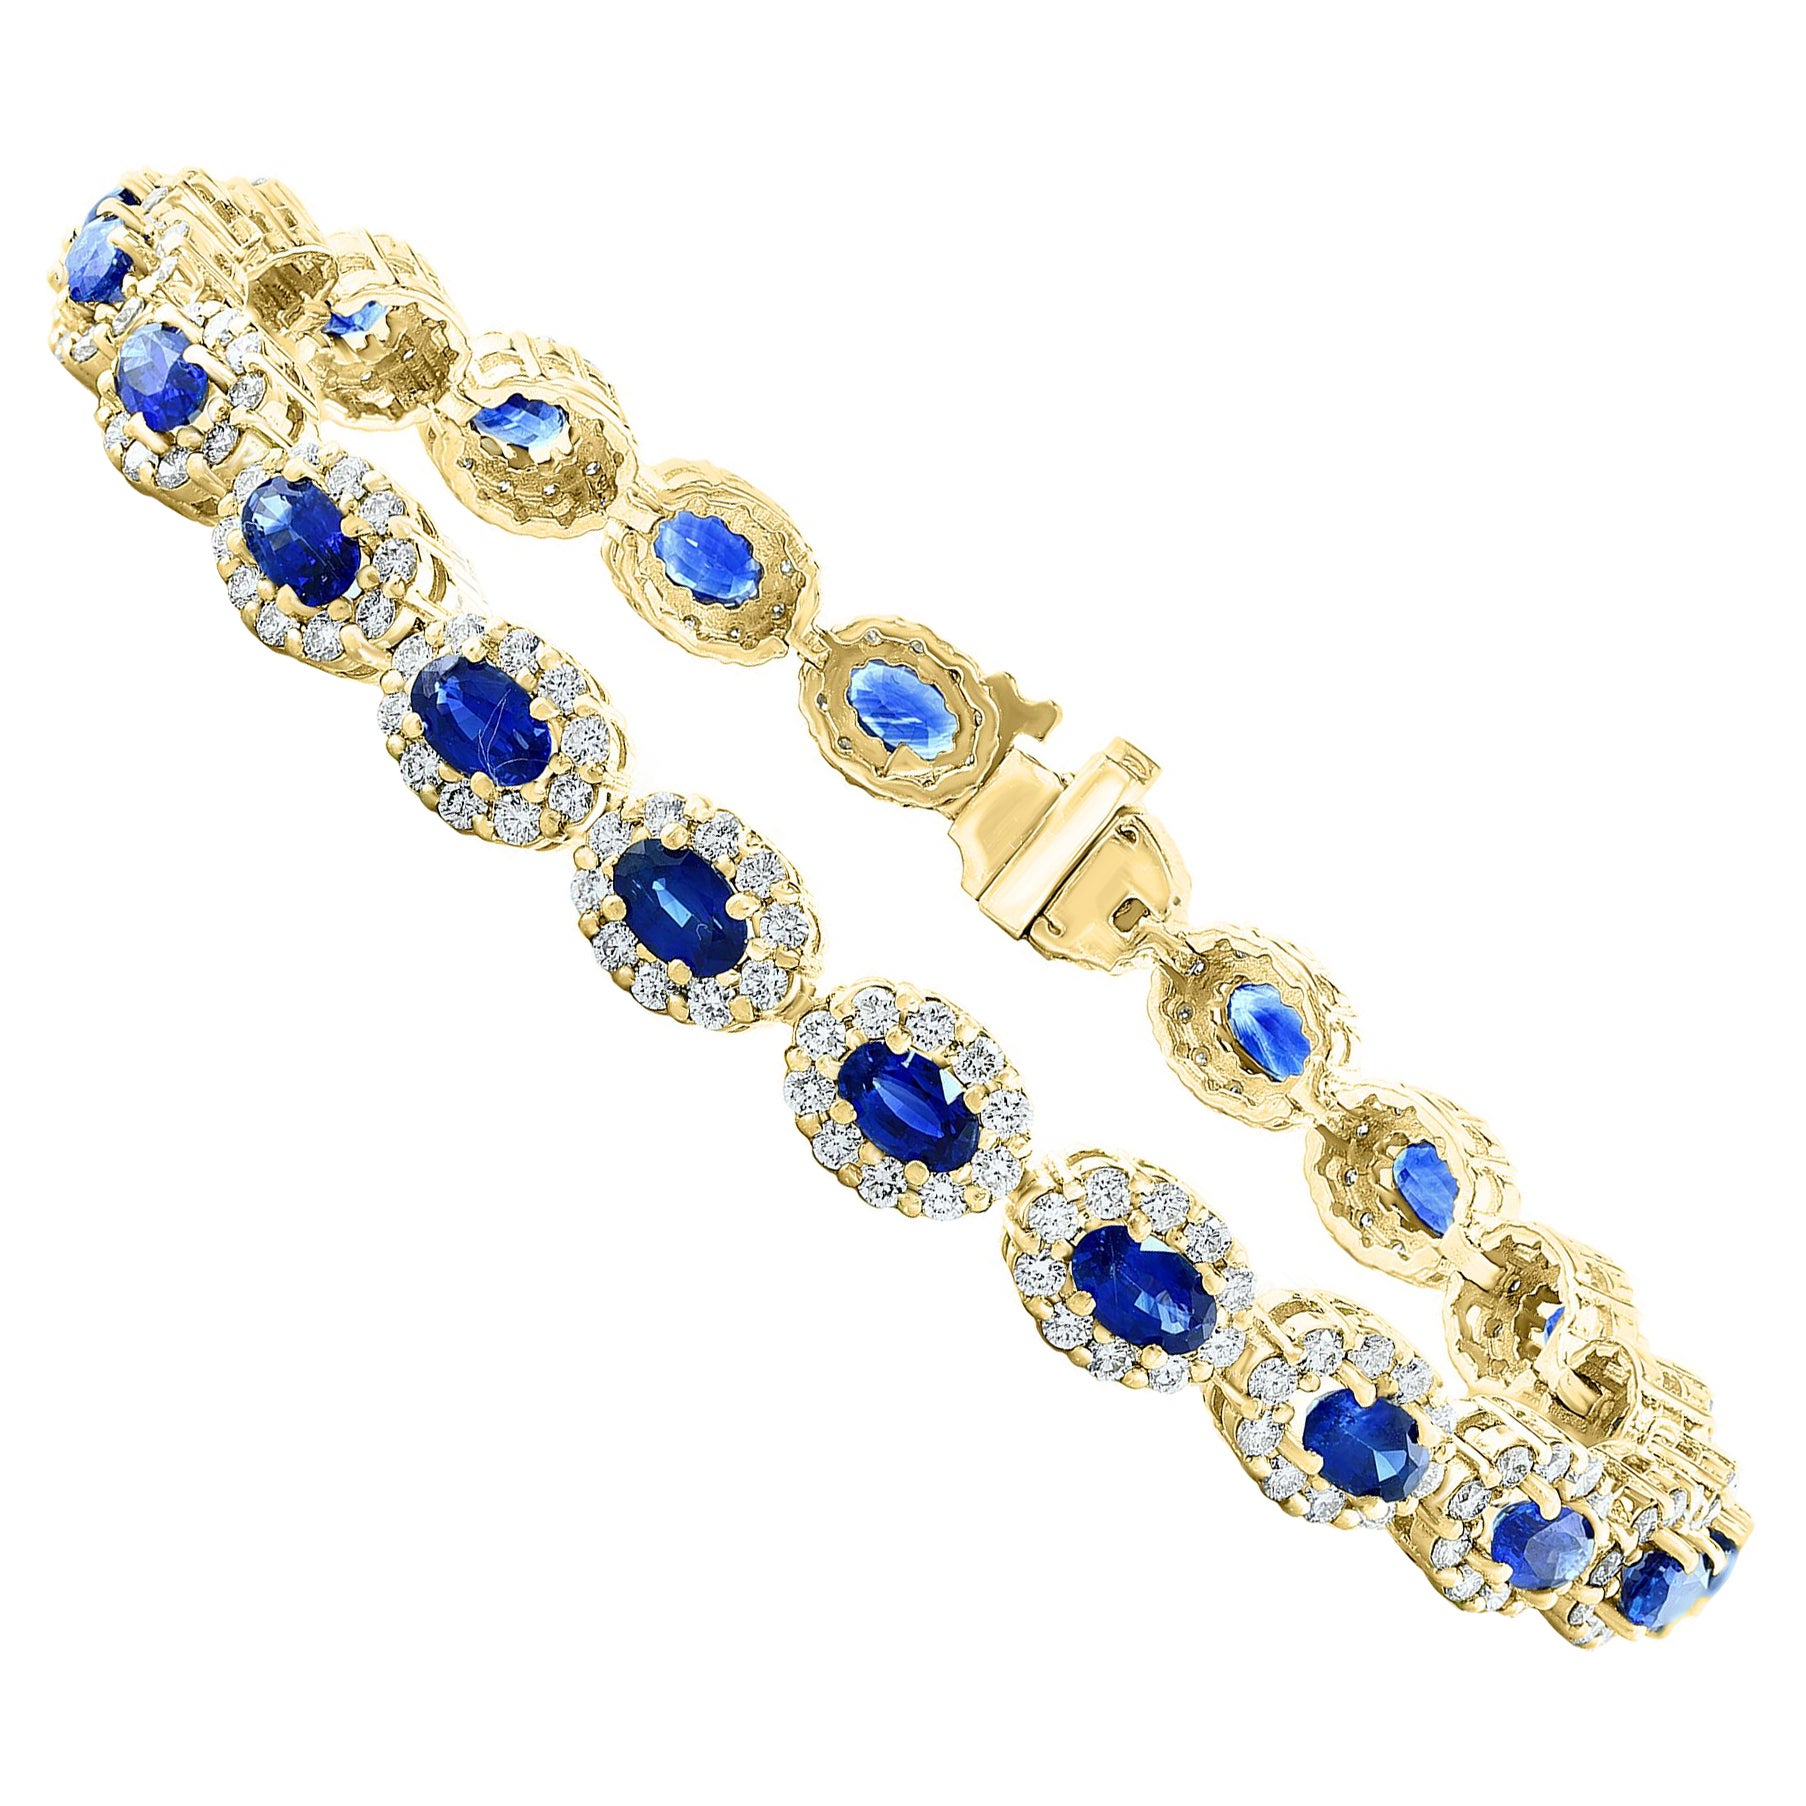 6.24 Carat Oval Cut Blue Sapphire and Diamond Halo Bracelet in 14K Yellow Gold For Sale